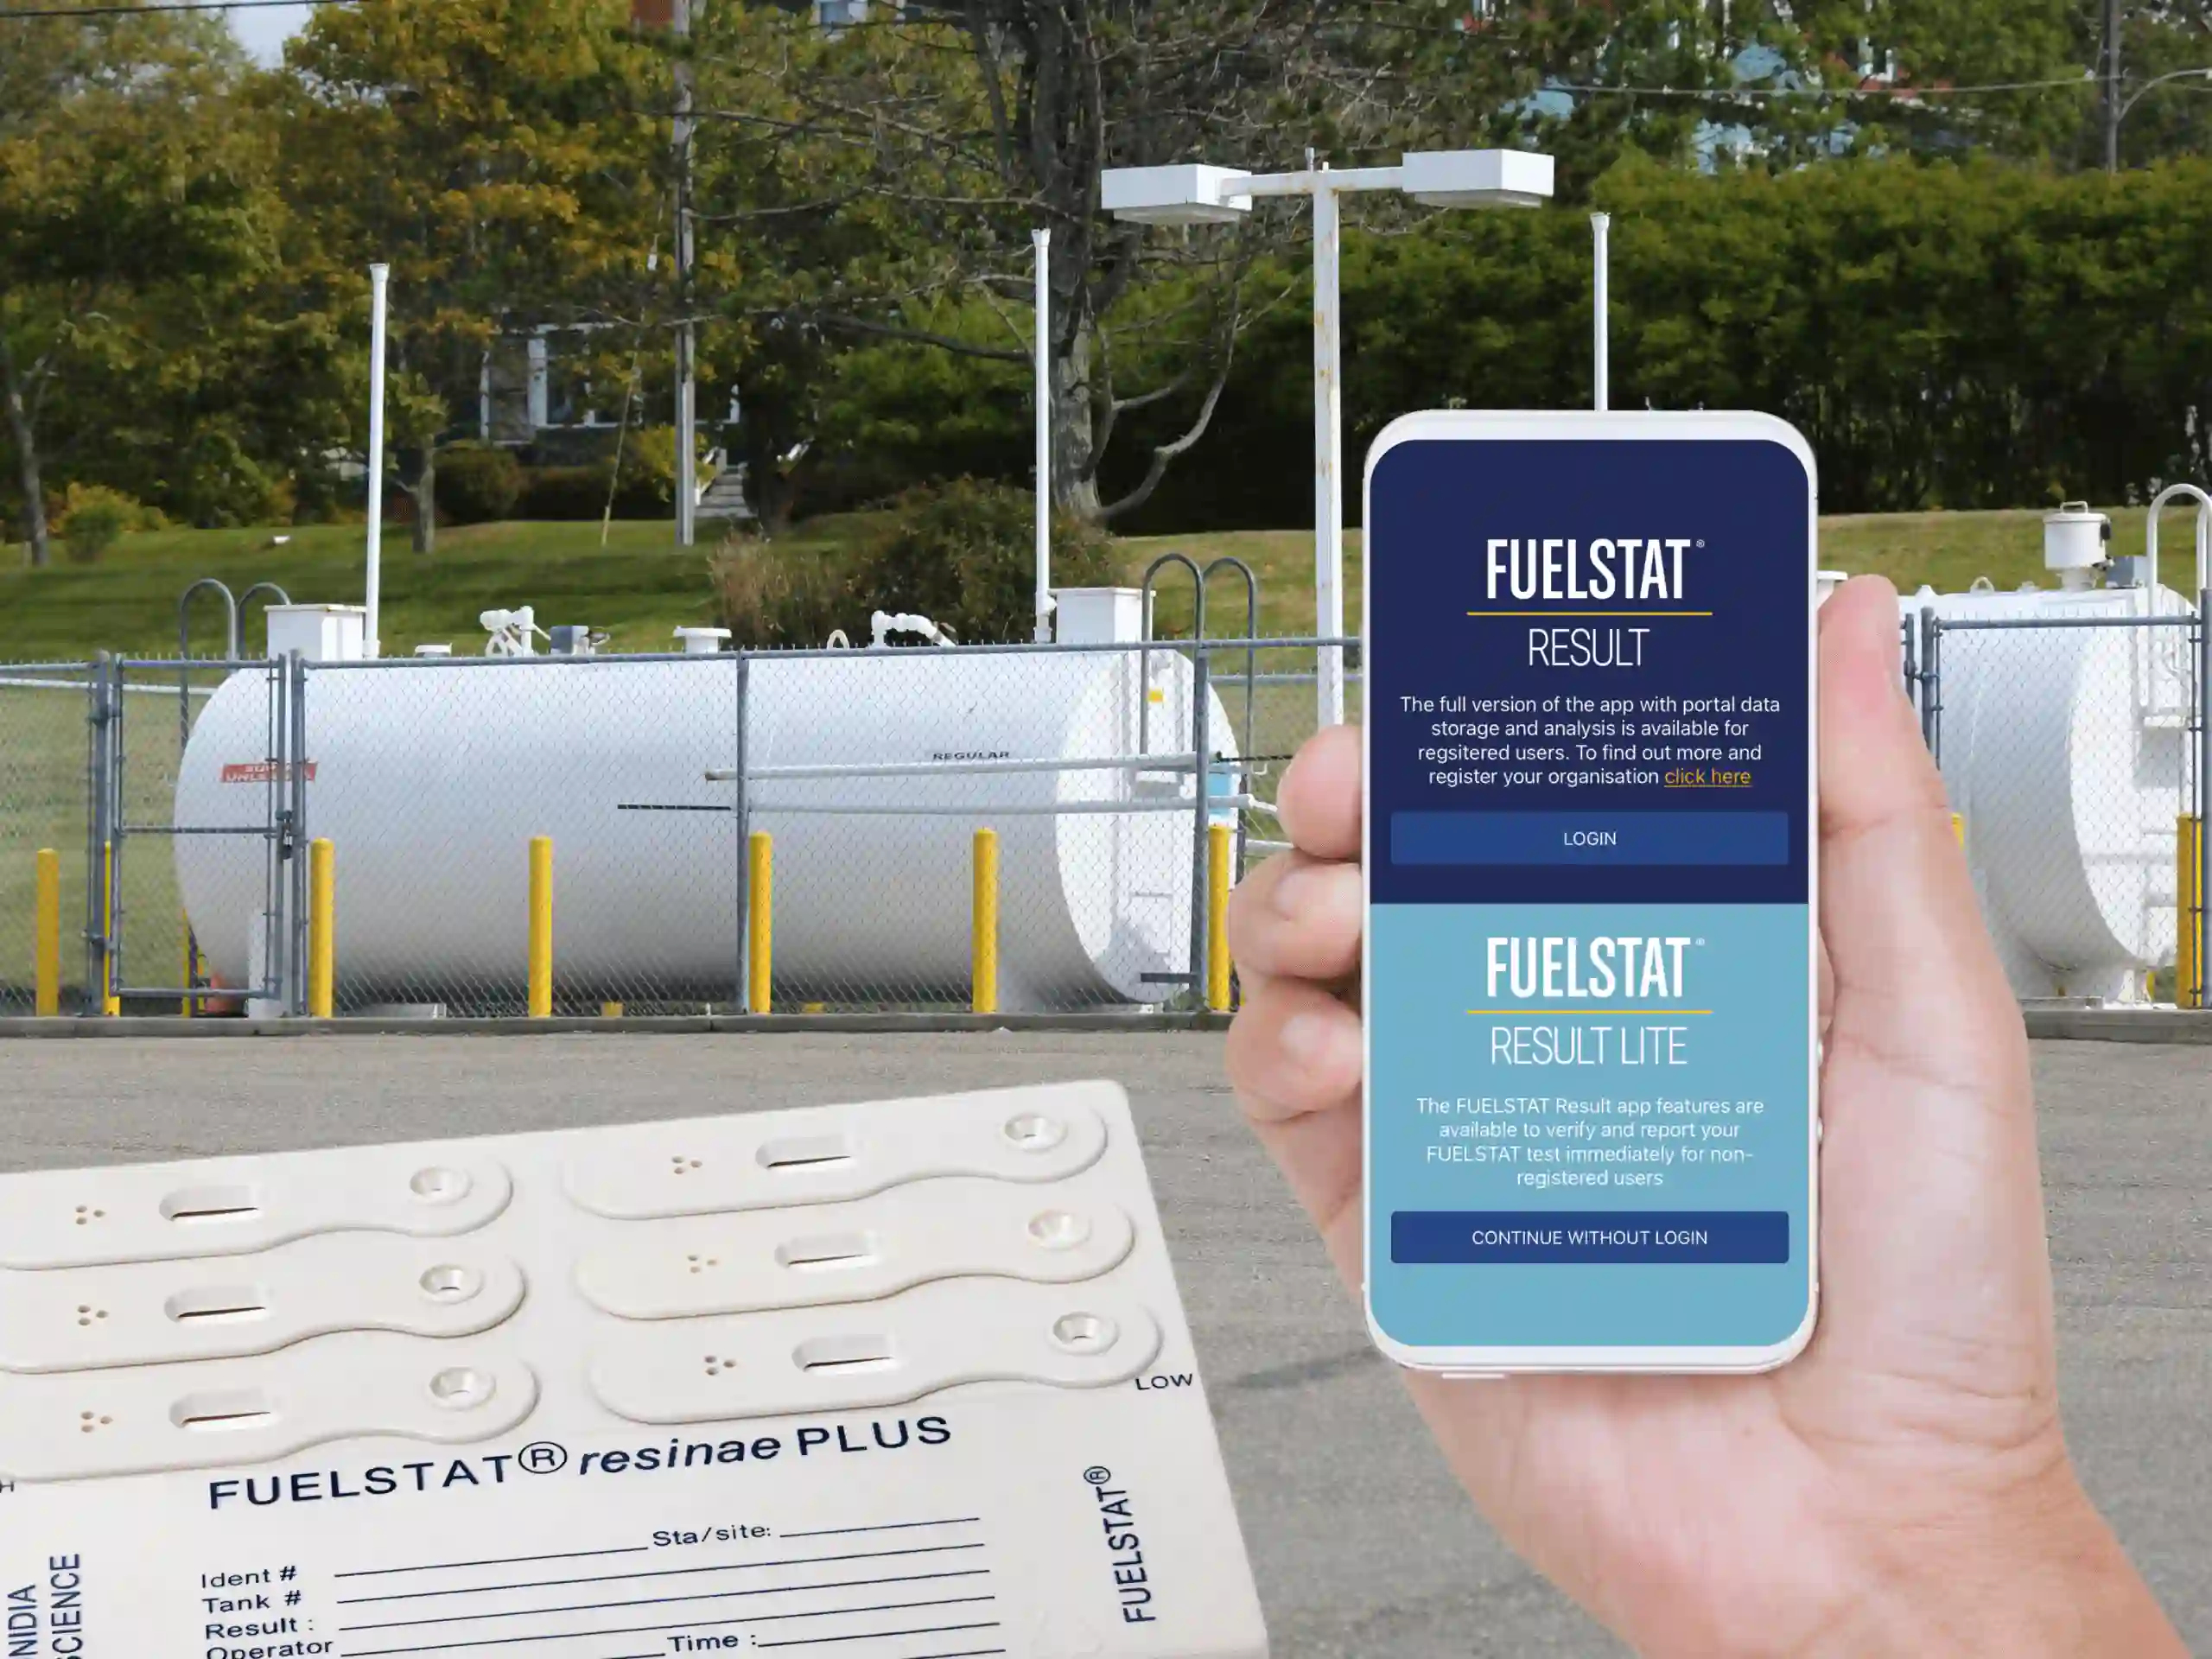 Hand holding a phone with Fuelstat test kit results app